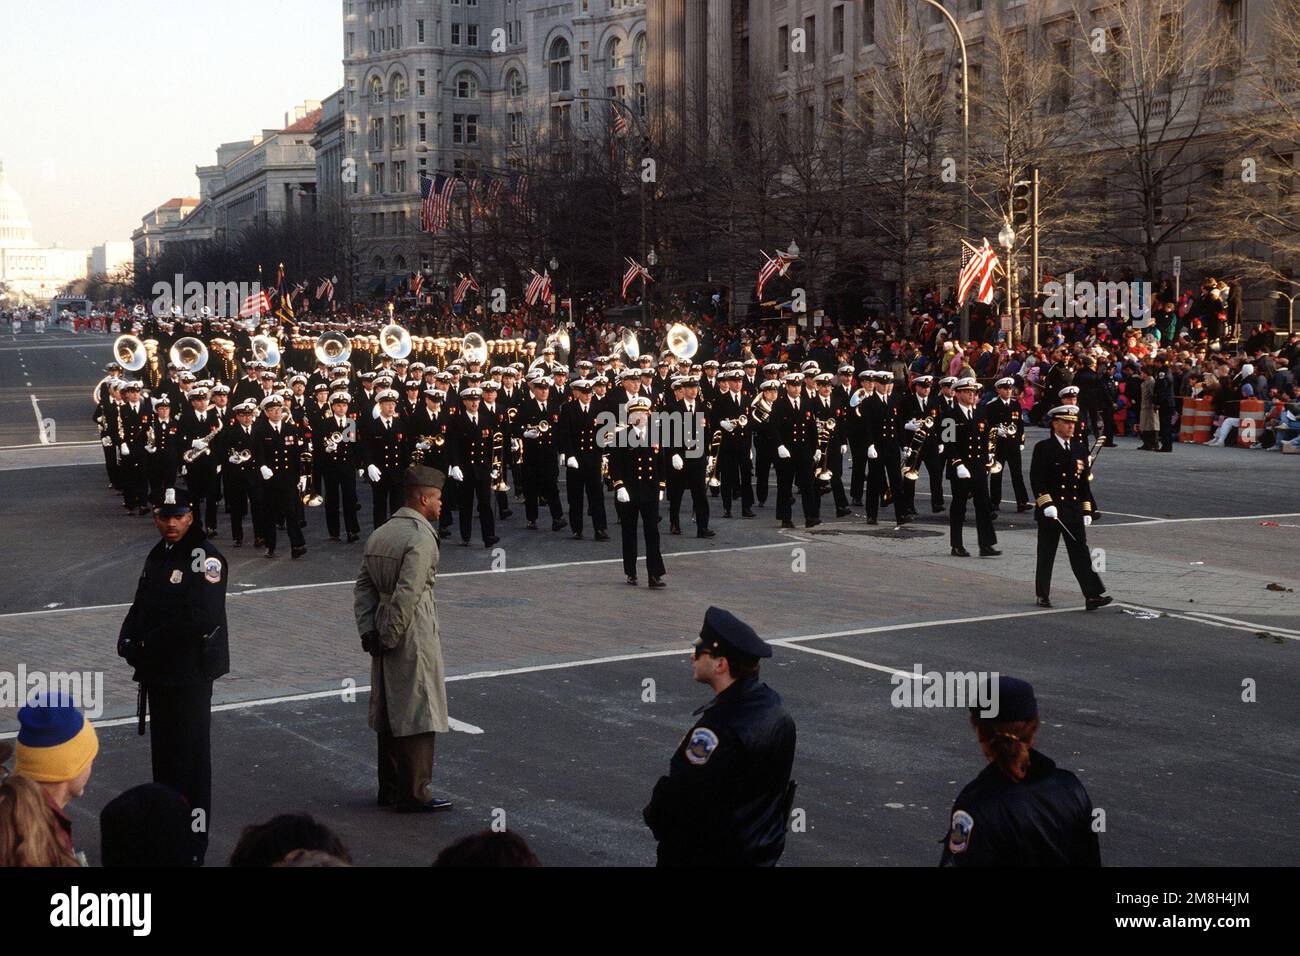 Inaugural parade, the US Navy Bank from the Washington D.C. Naval yard directed by CAPT William J. Phillips Jr. Base: Washington State: District Of Columbia (DC) Country: United States Of America (USA) Stock Photo